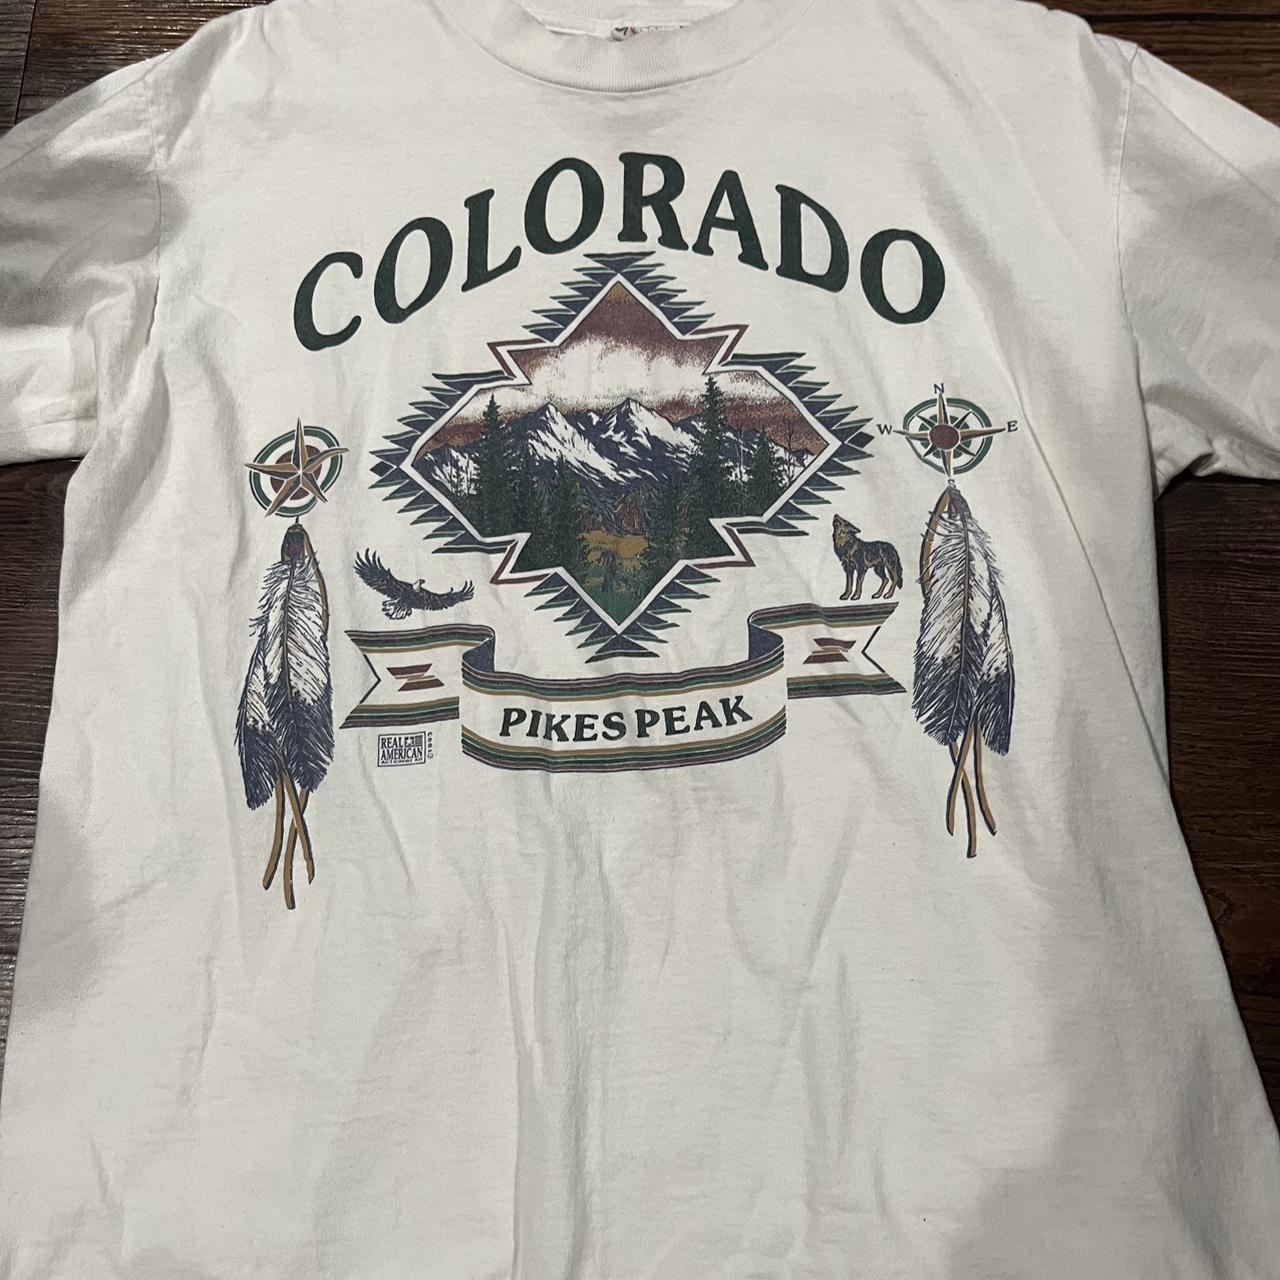 1993 Colorado t shirt Very cool Listed as a large - Depop